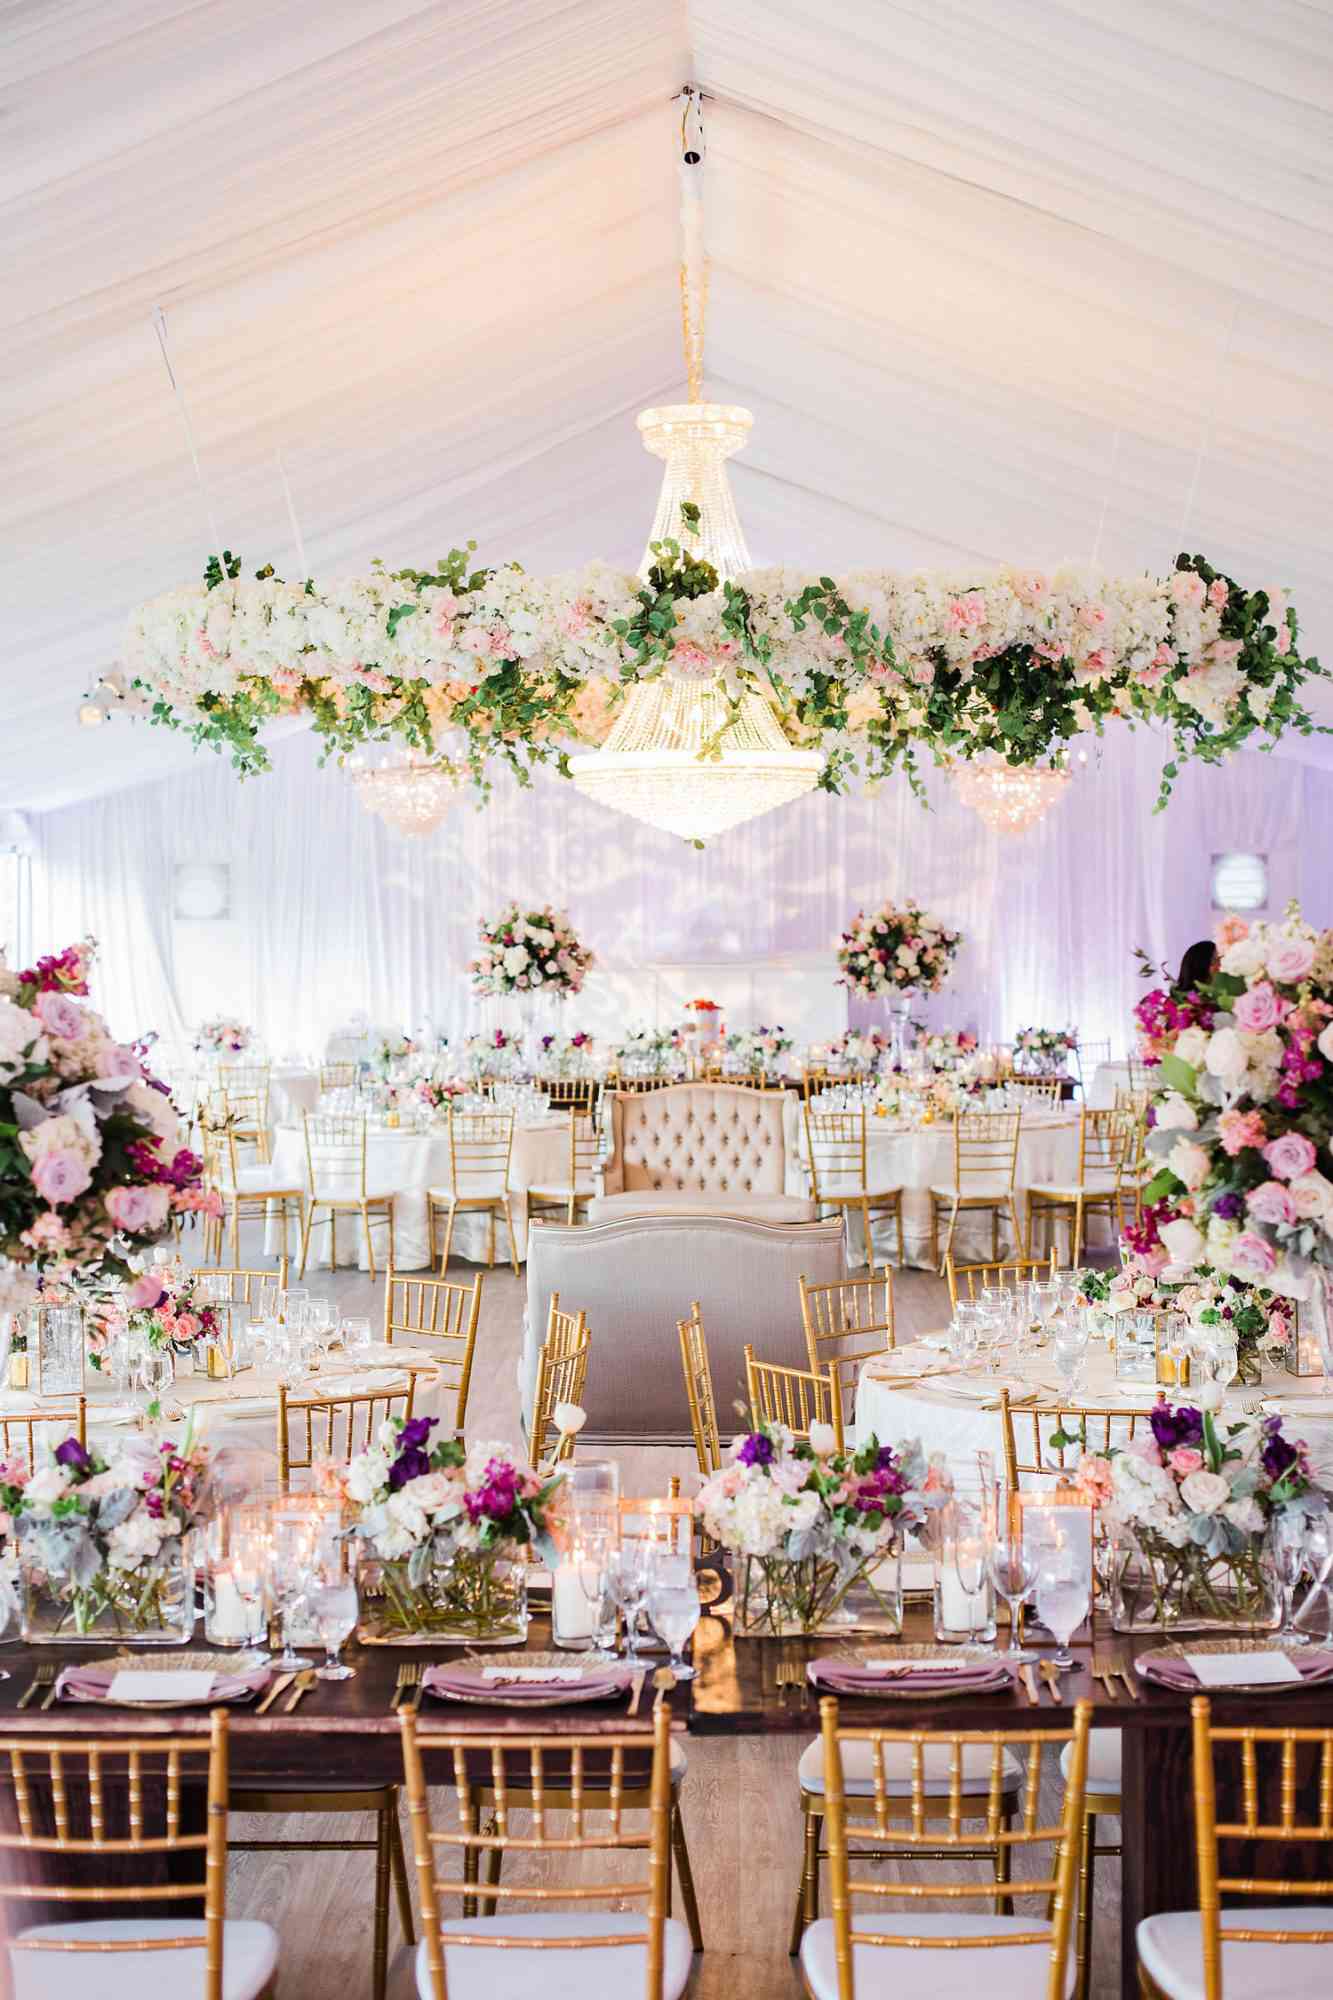 white tent wedding reception filled with hanging floral displays, centerpiece arrangements, and white and dinning furniture